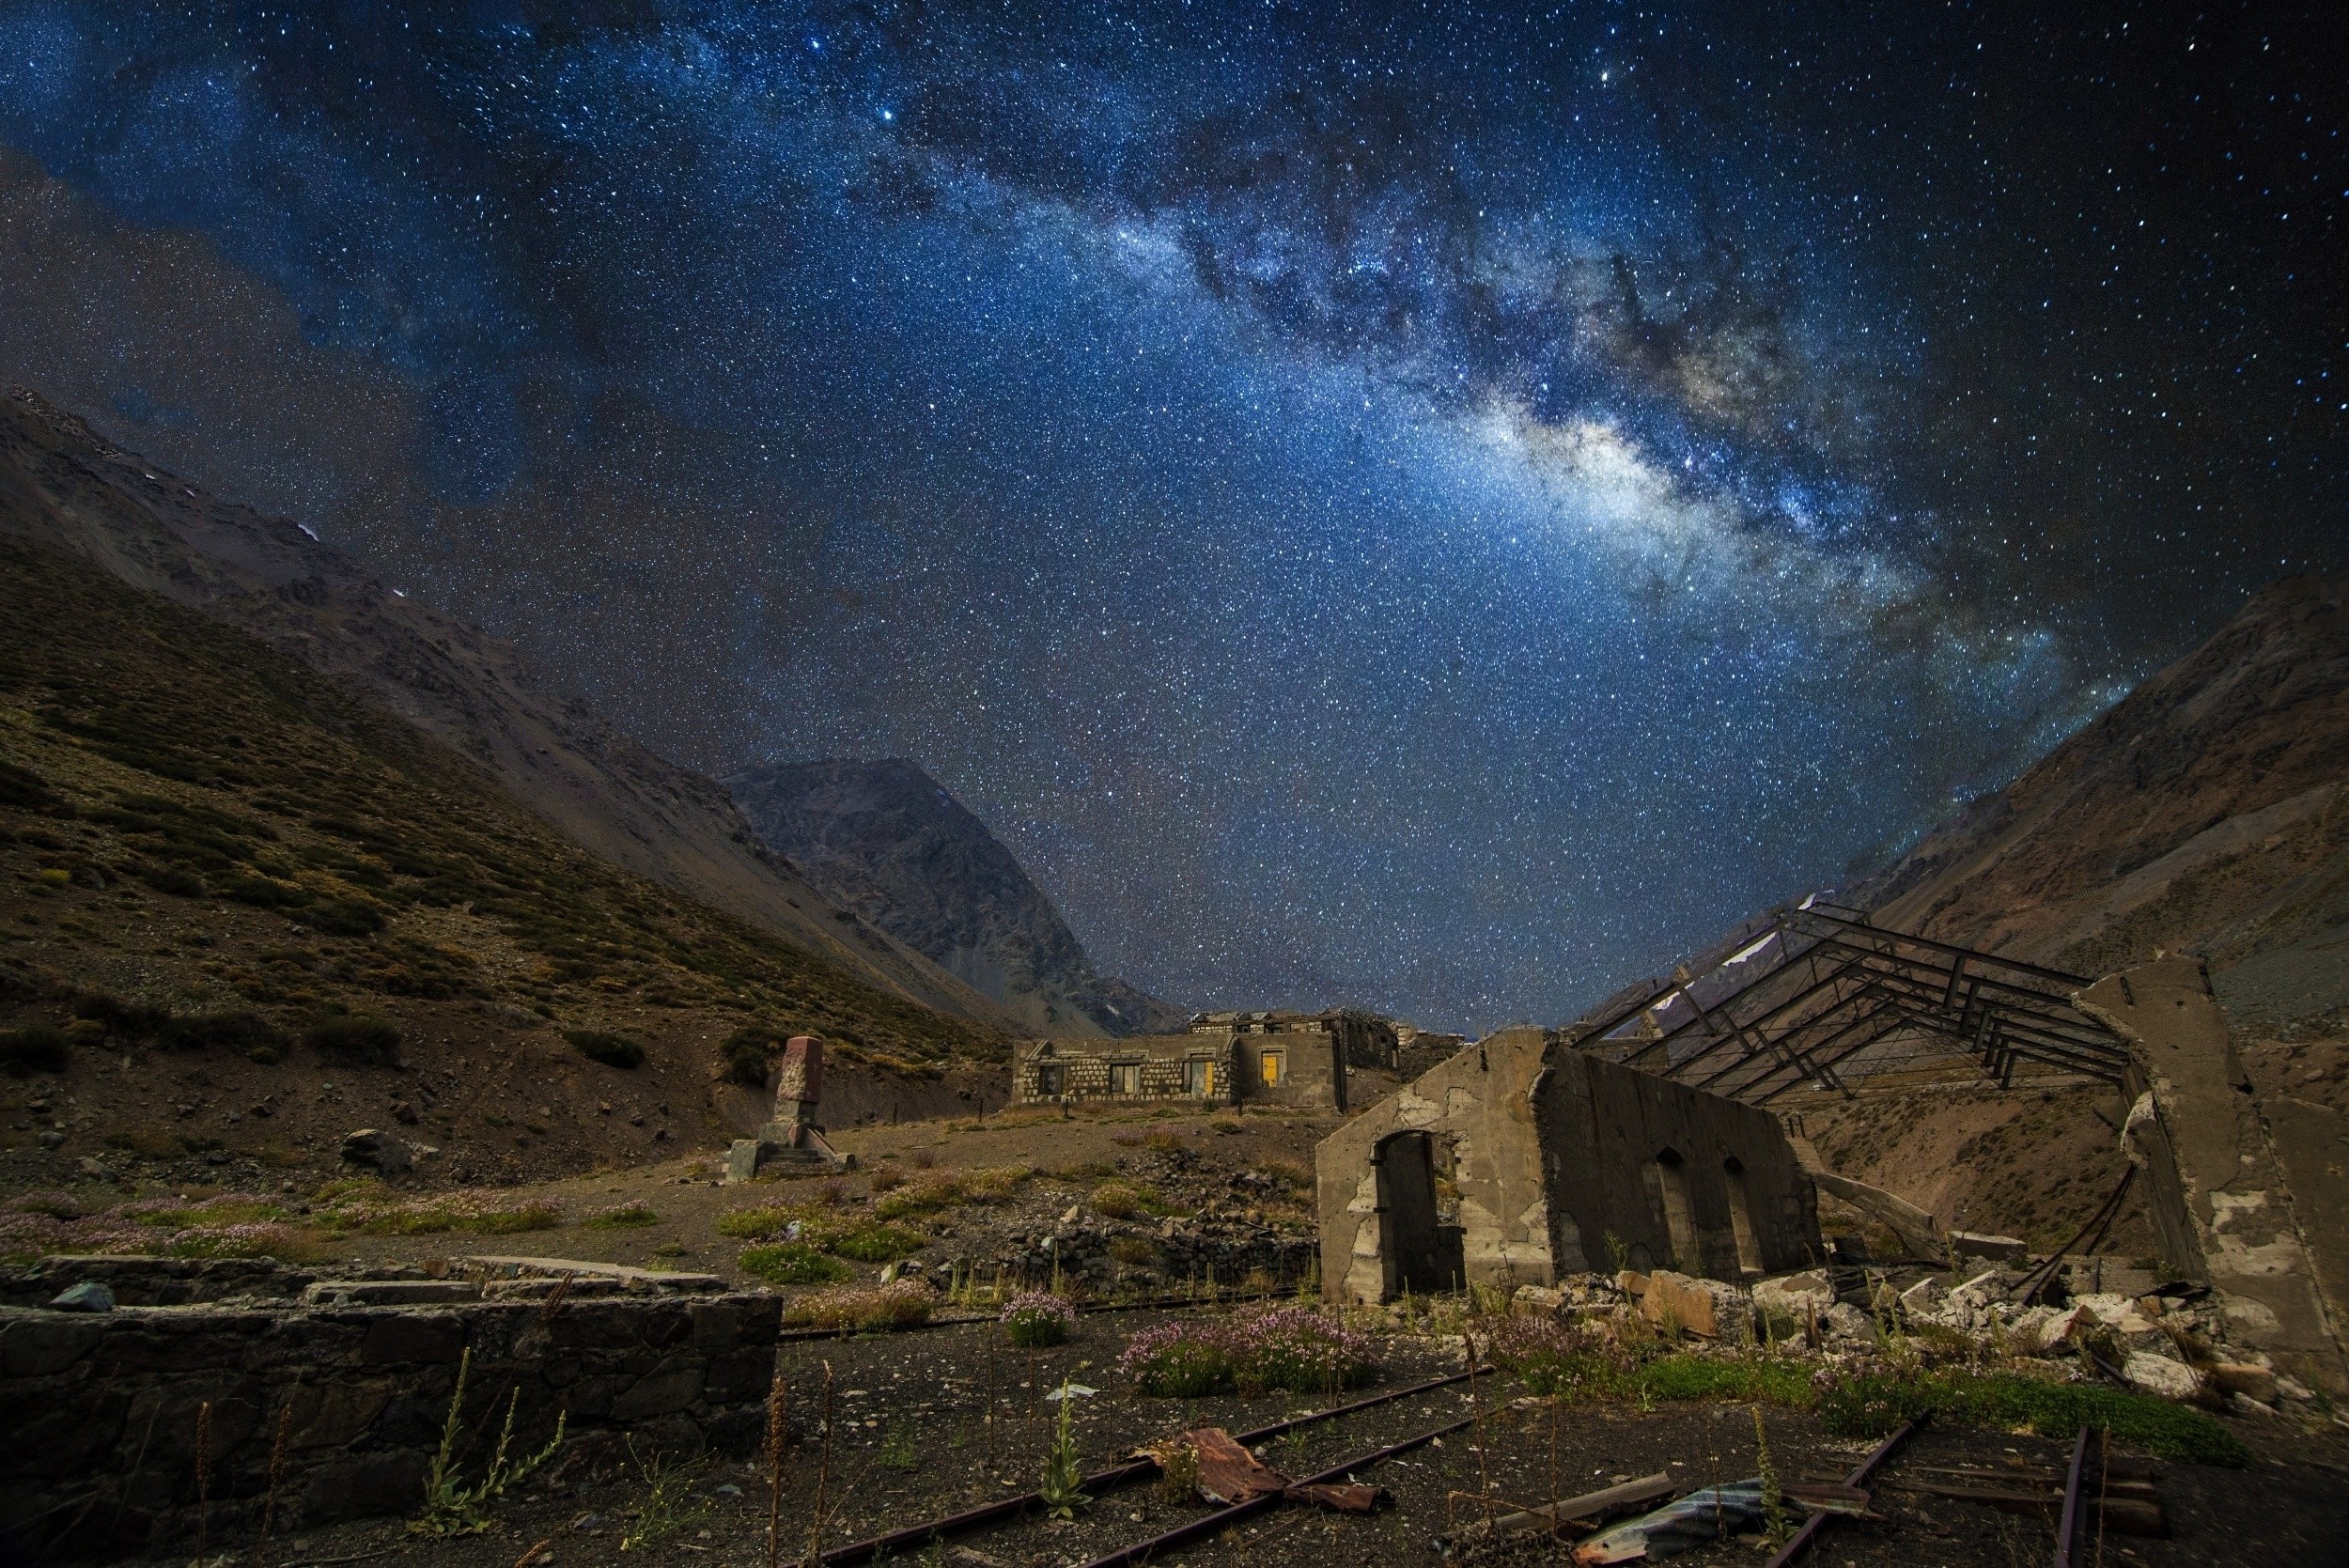 nature, Landscape, Train Station, Abandoned, Mountain, Milky Way, Galaxy, Starry Night, Railway, Chile, Long Exposure Wallpaper